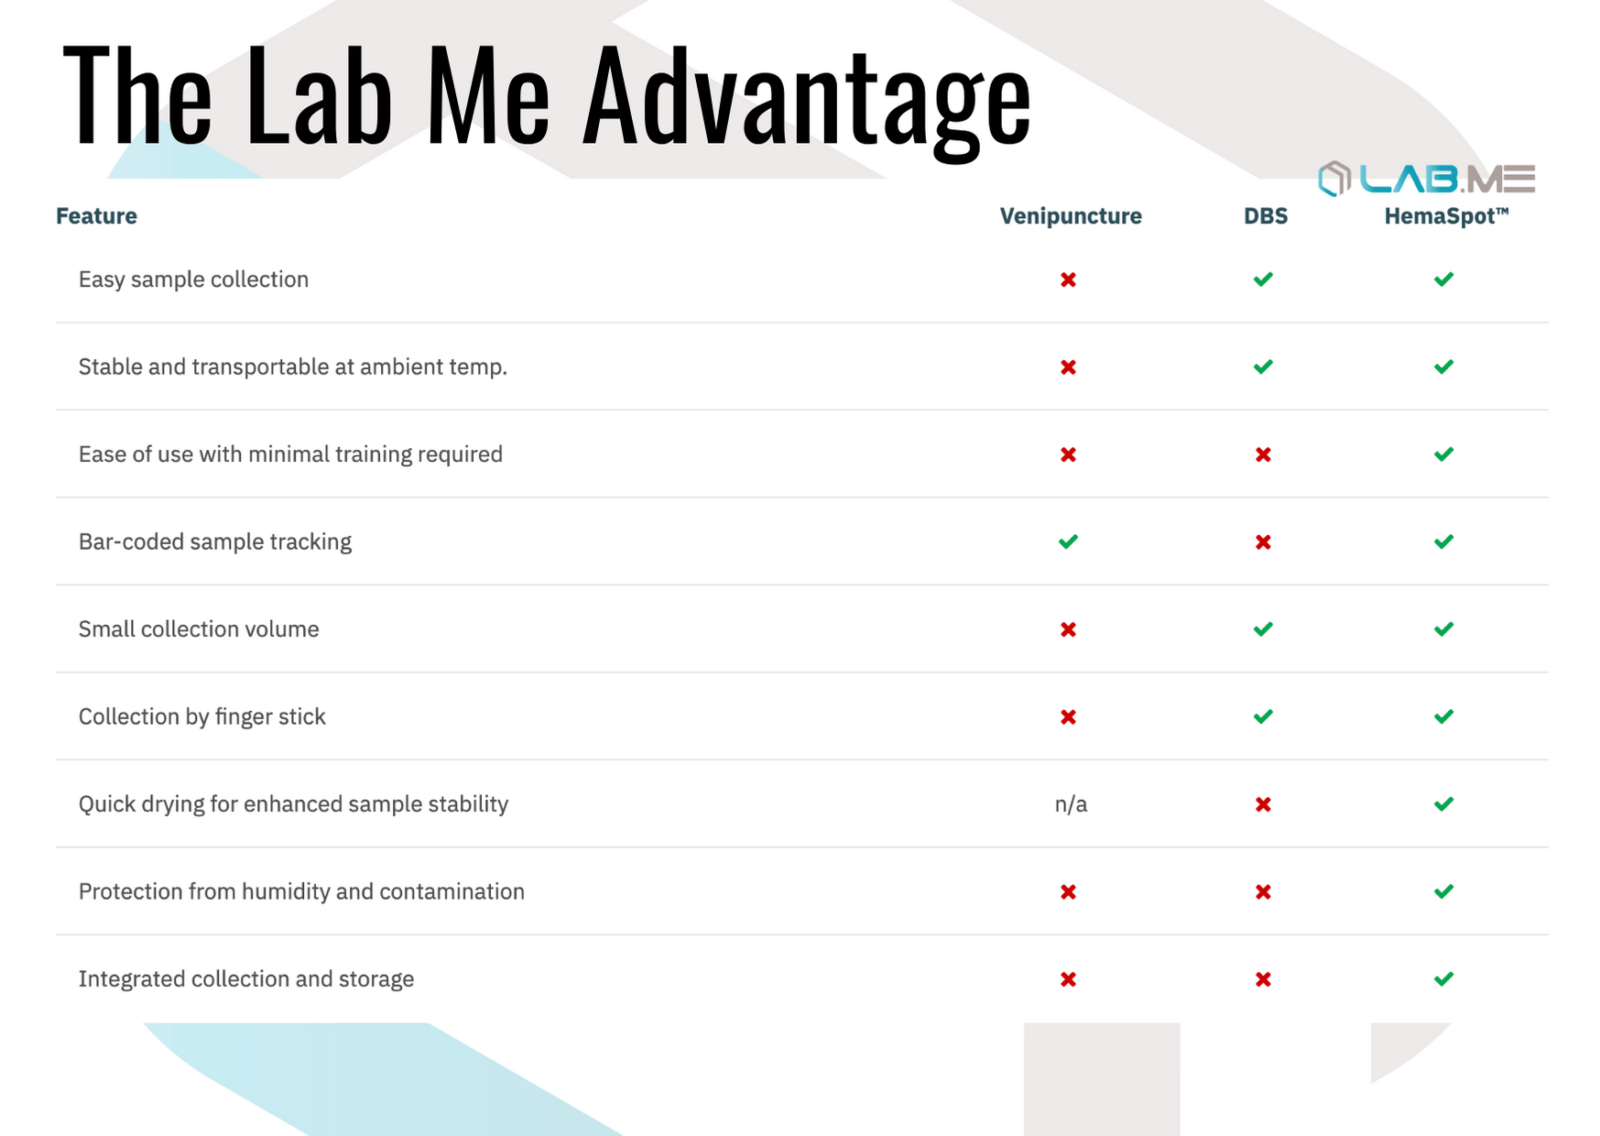 Dry Blood Spot Cards Vs. Our PSM System - Accuracy Compared - Lab Me